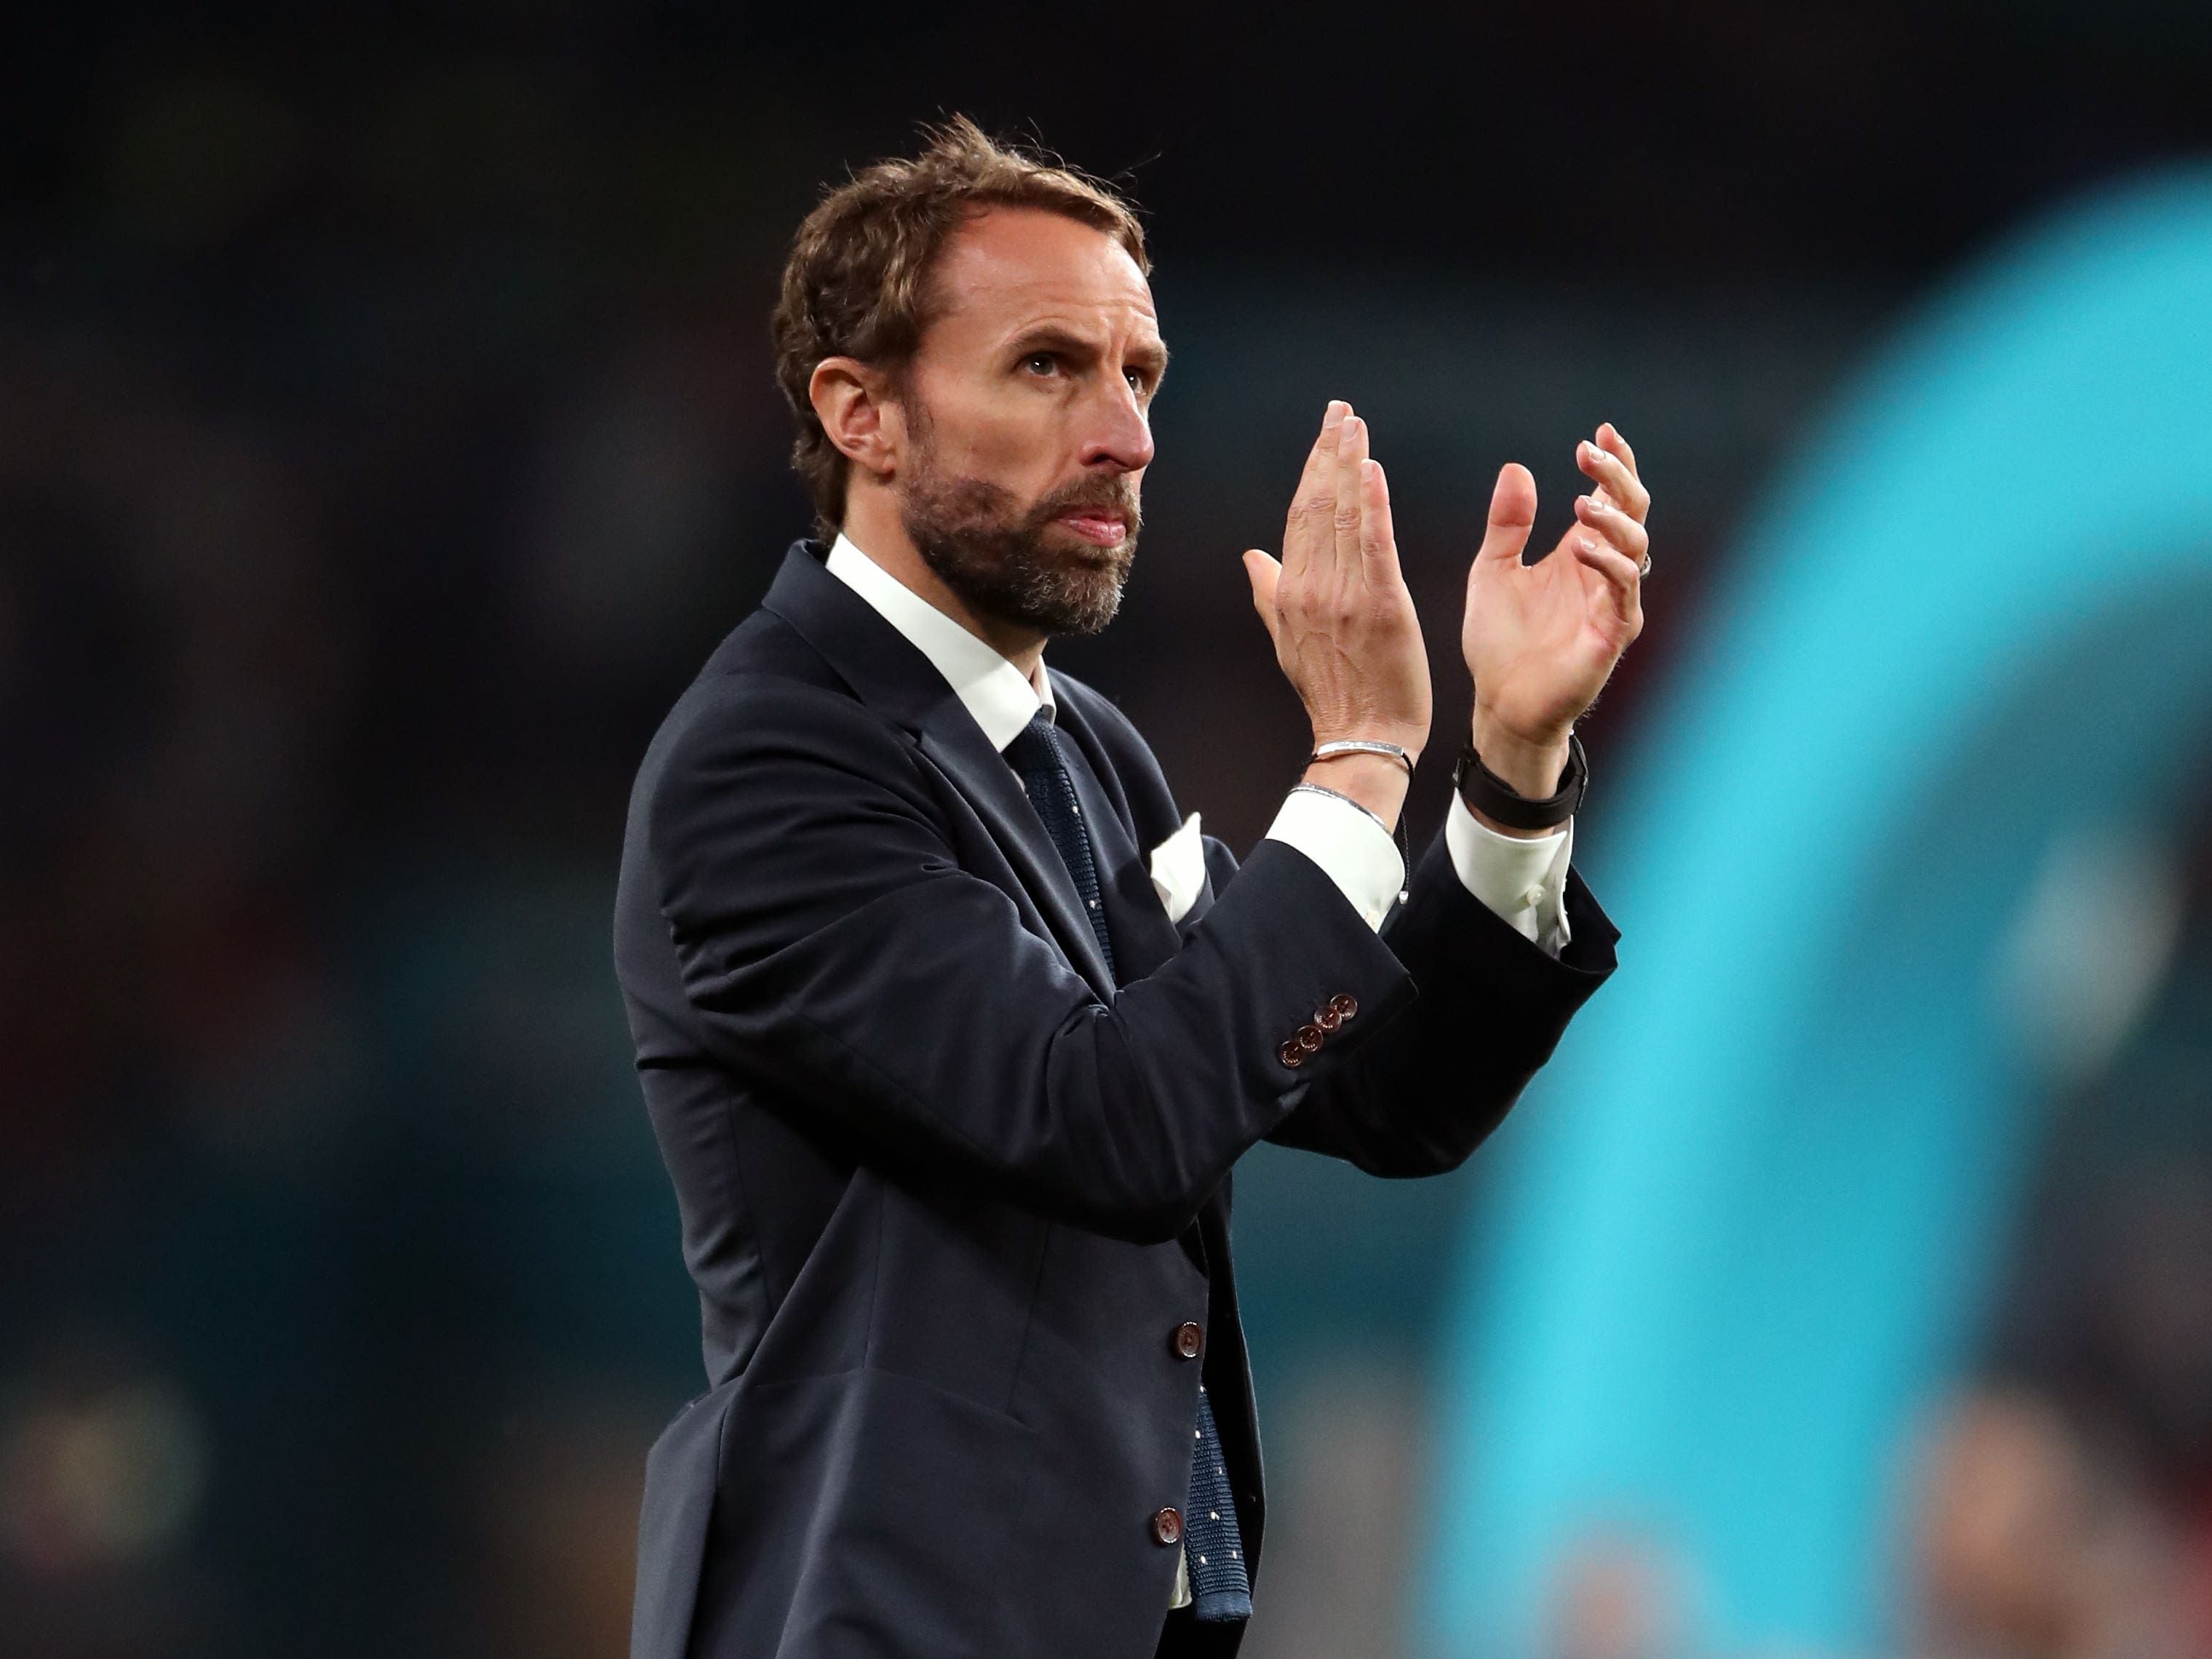 Gareth Southgate says England have ‘refined’ penalty preparations